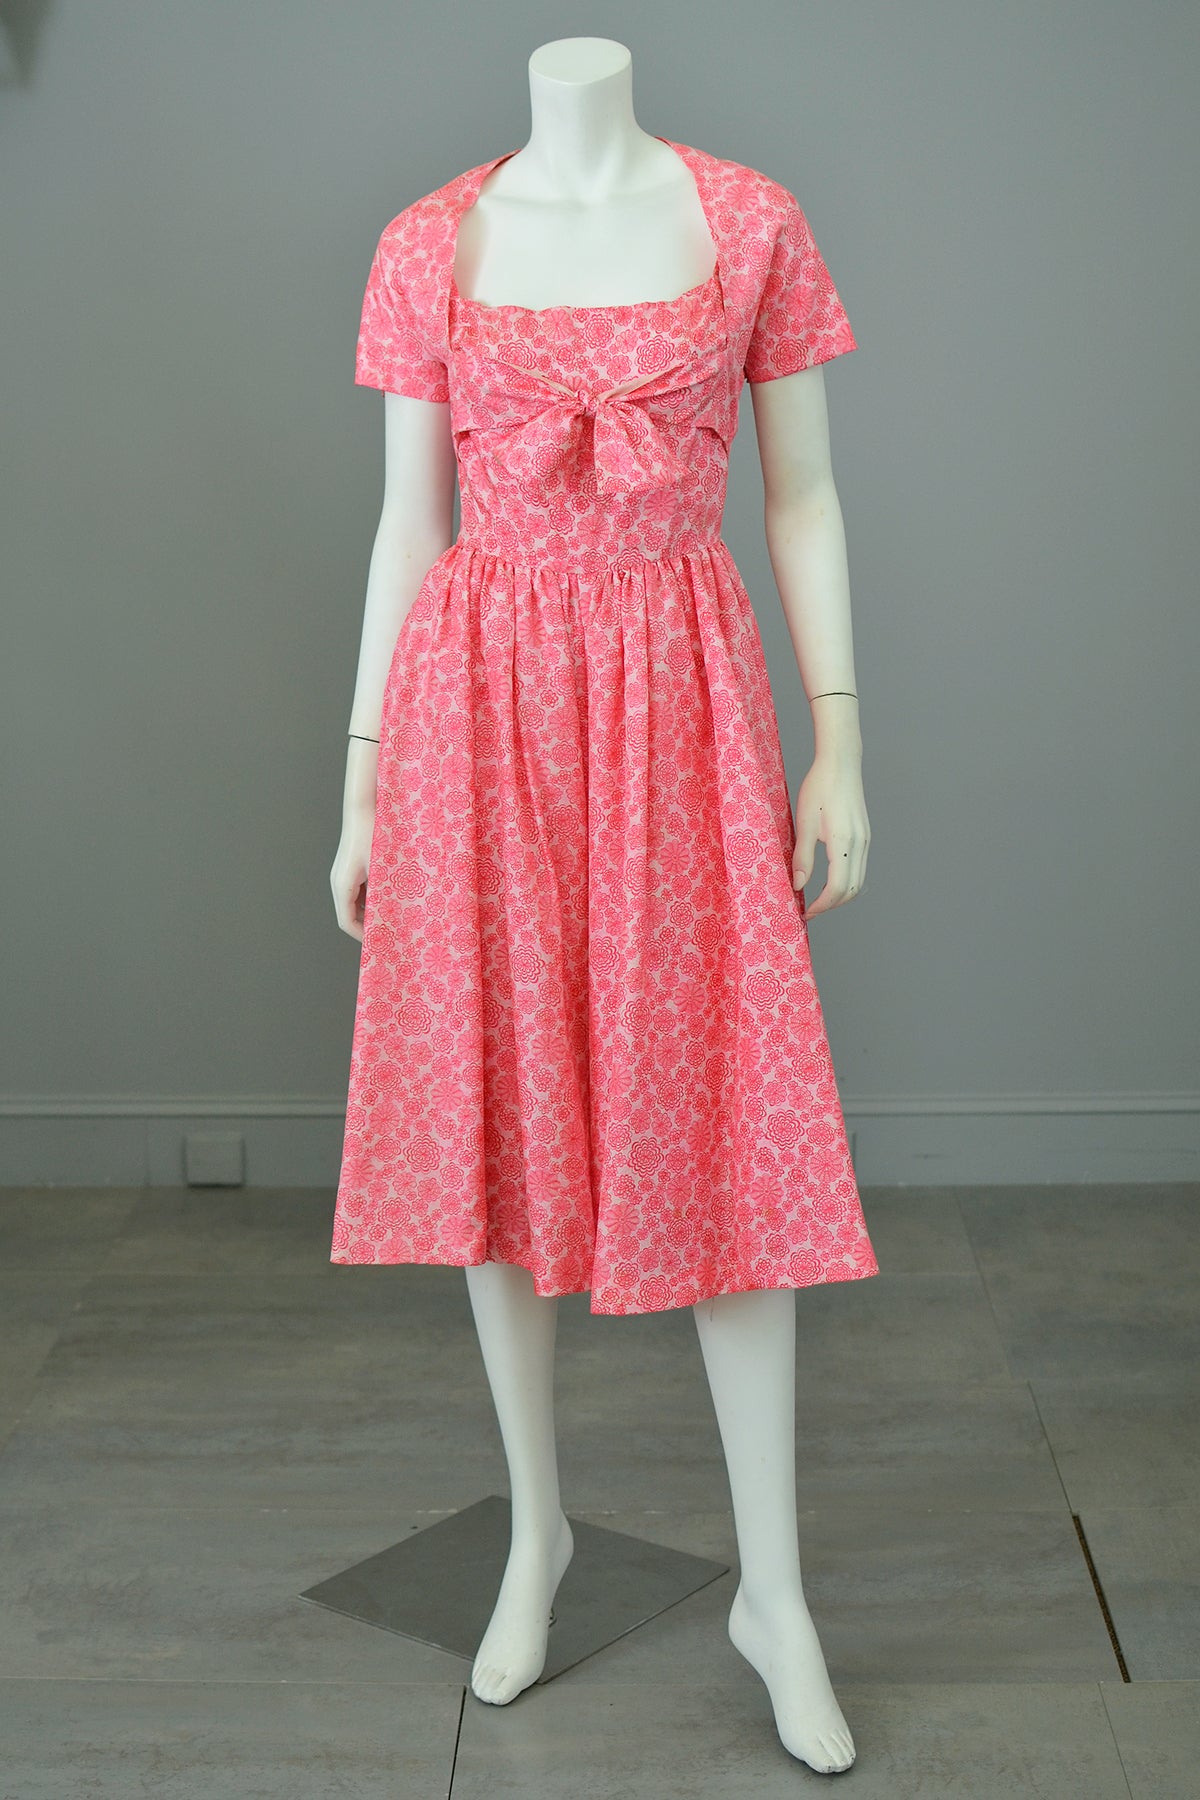 1950s Barbie Hot Pink Pinwheels Print Fit and Flare Party Dress with Attached Tie Front Shrug